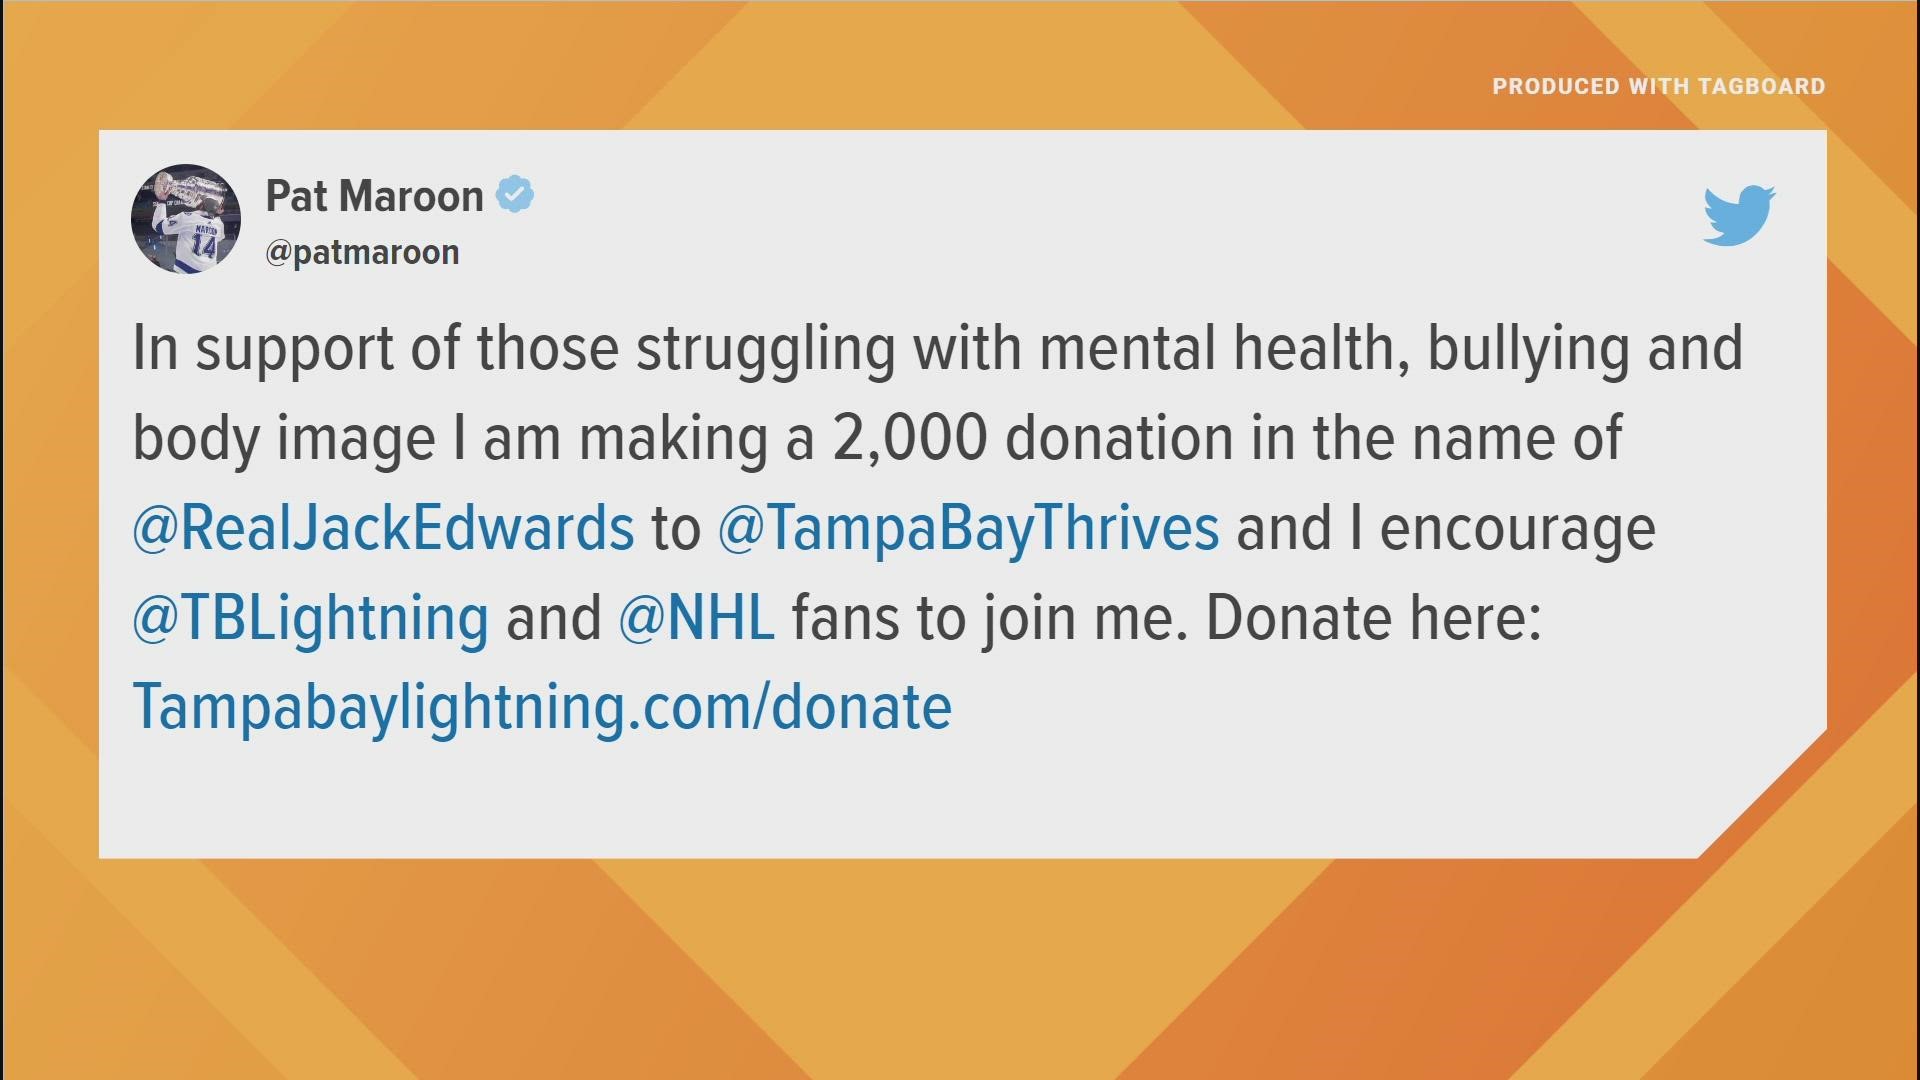 St. Louis native and former Blues player Patrick "Pat" Maroon responded with a charitable gesture after a broadcaster mocked his weight Tuesday night.